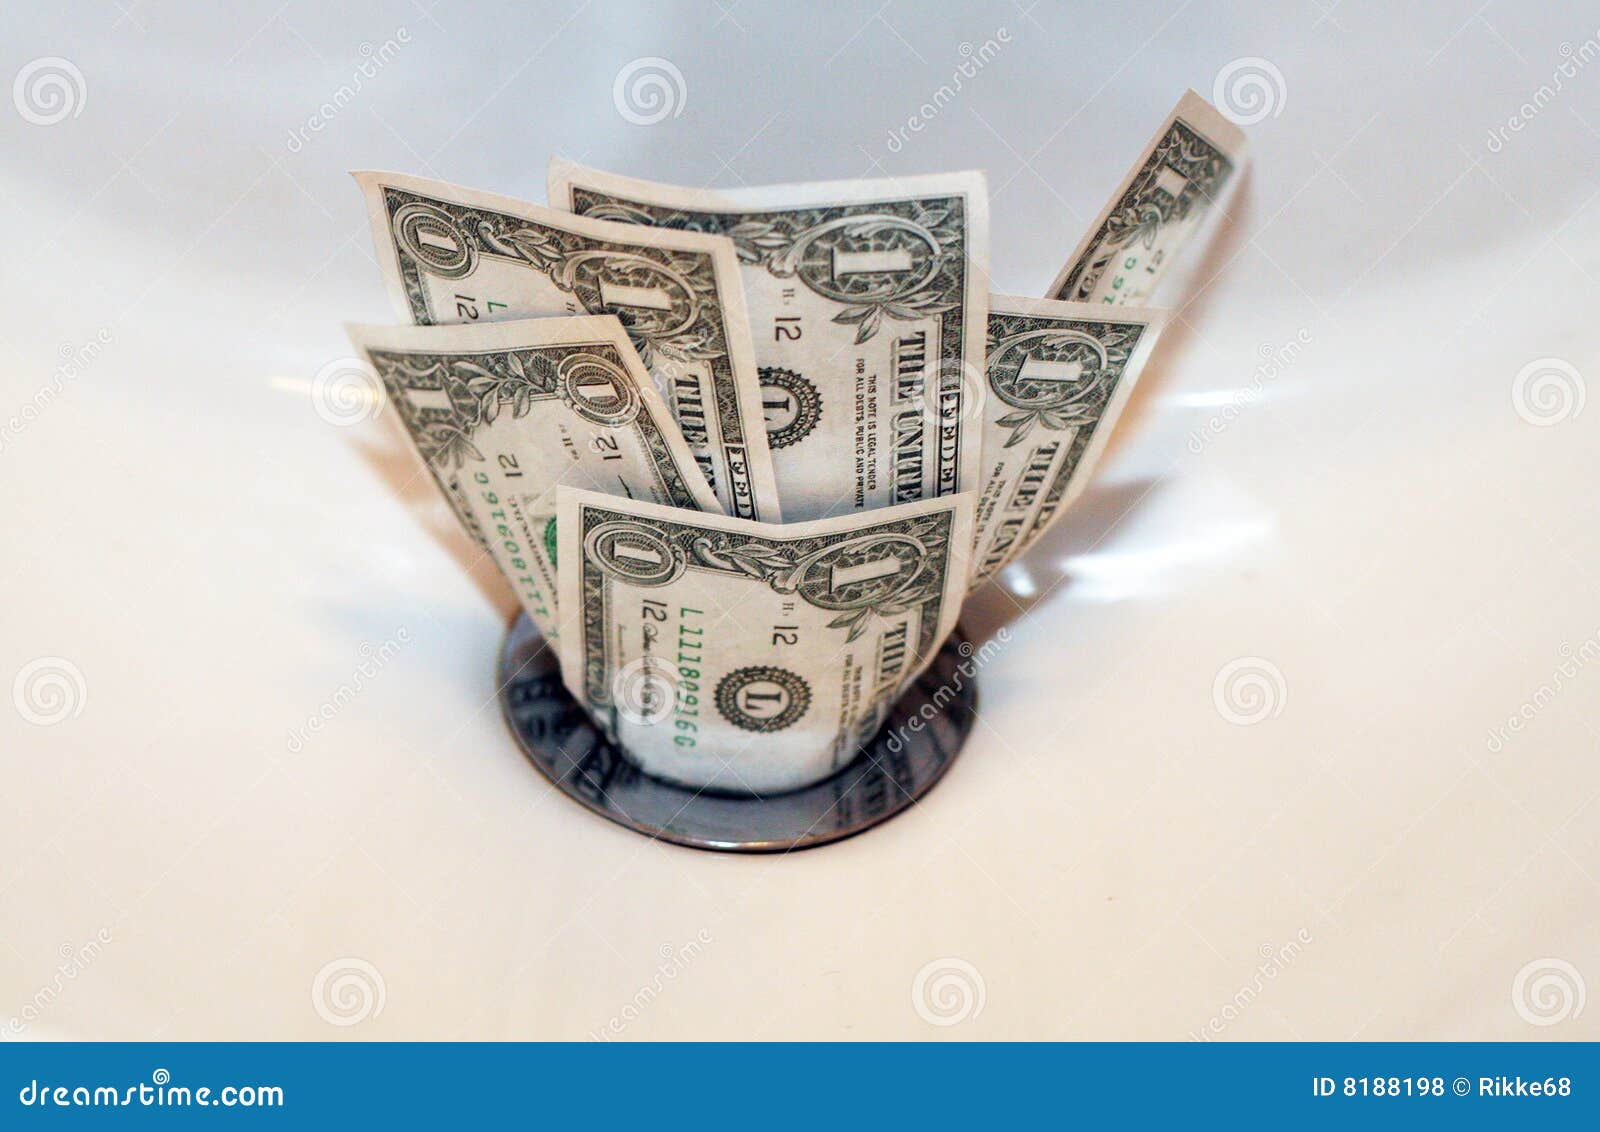 clipart of money going down the drain - photo #13